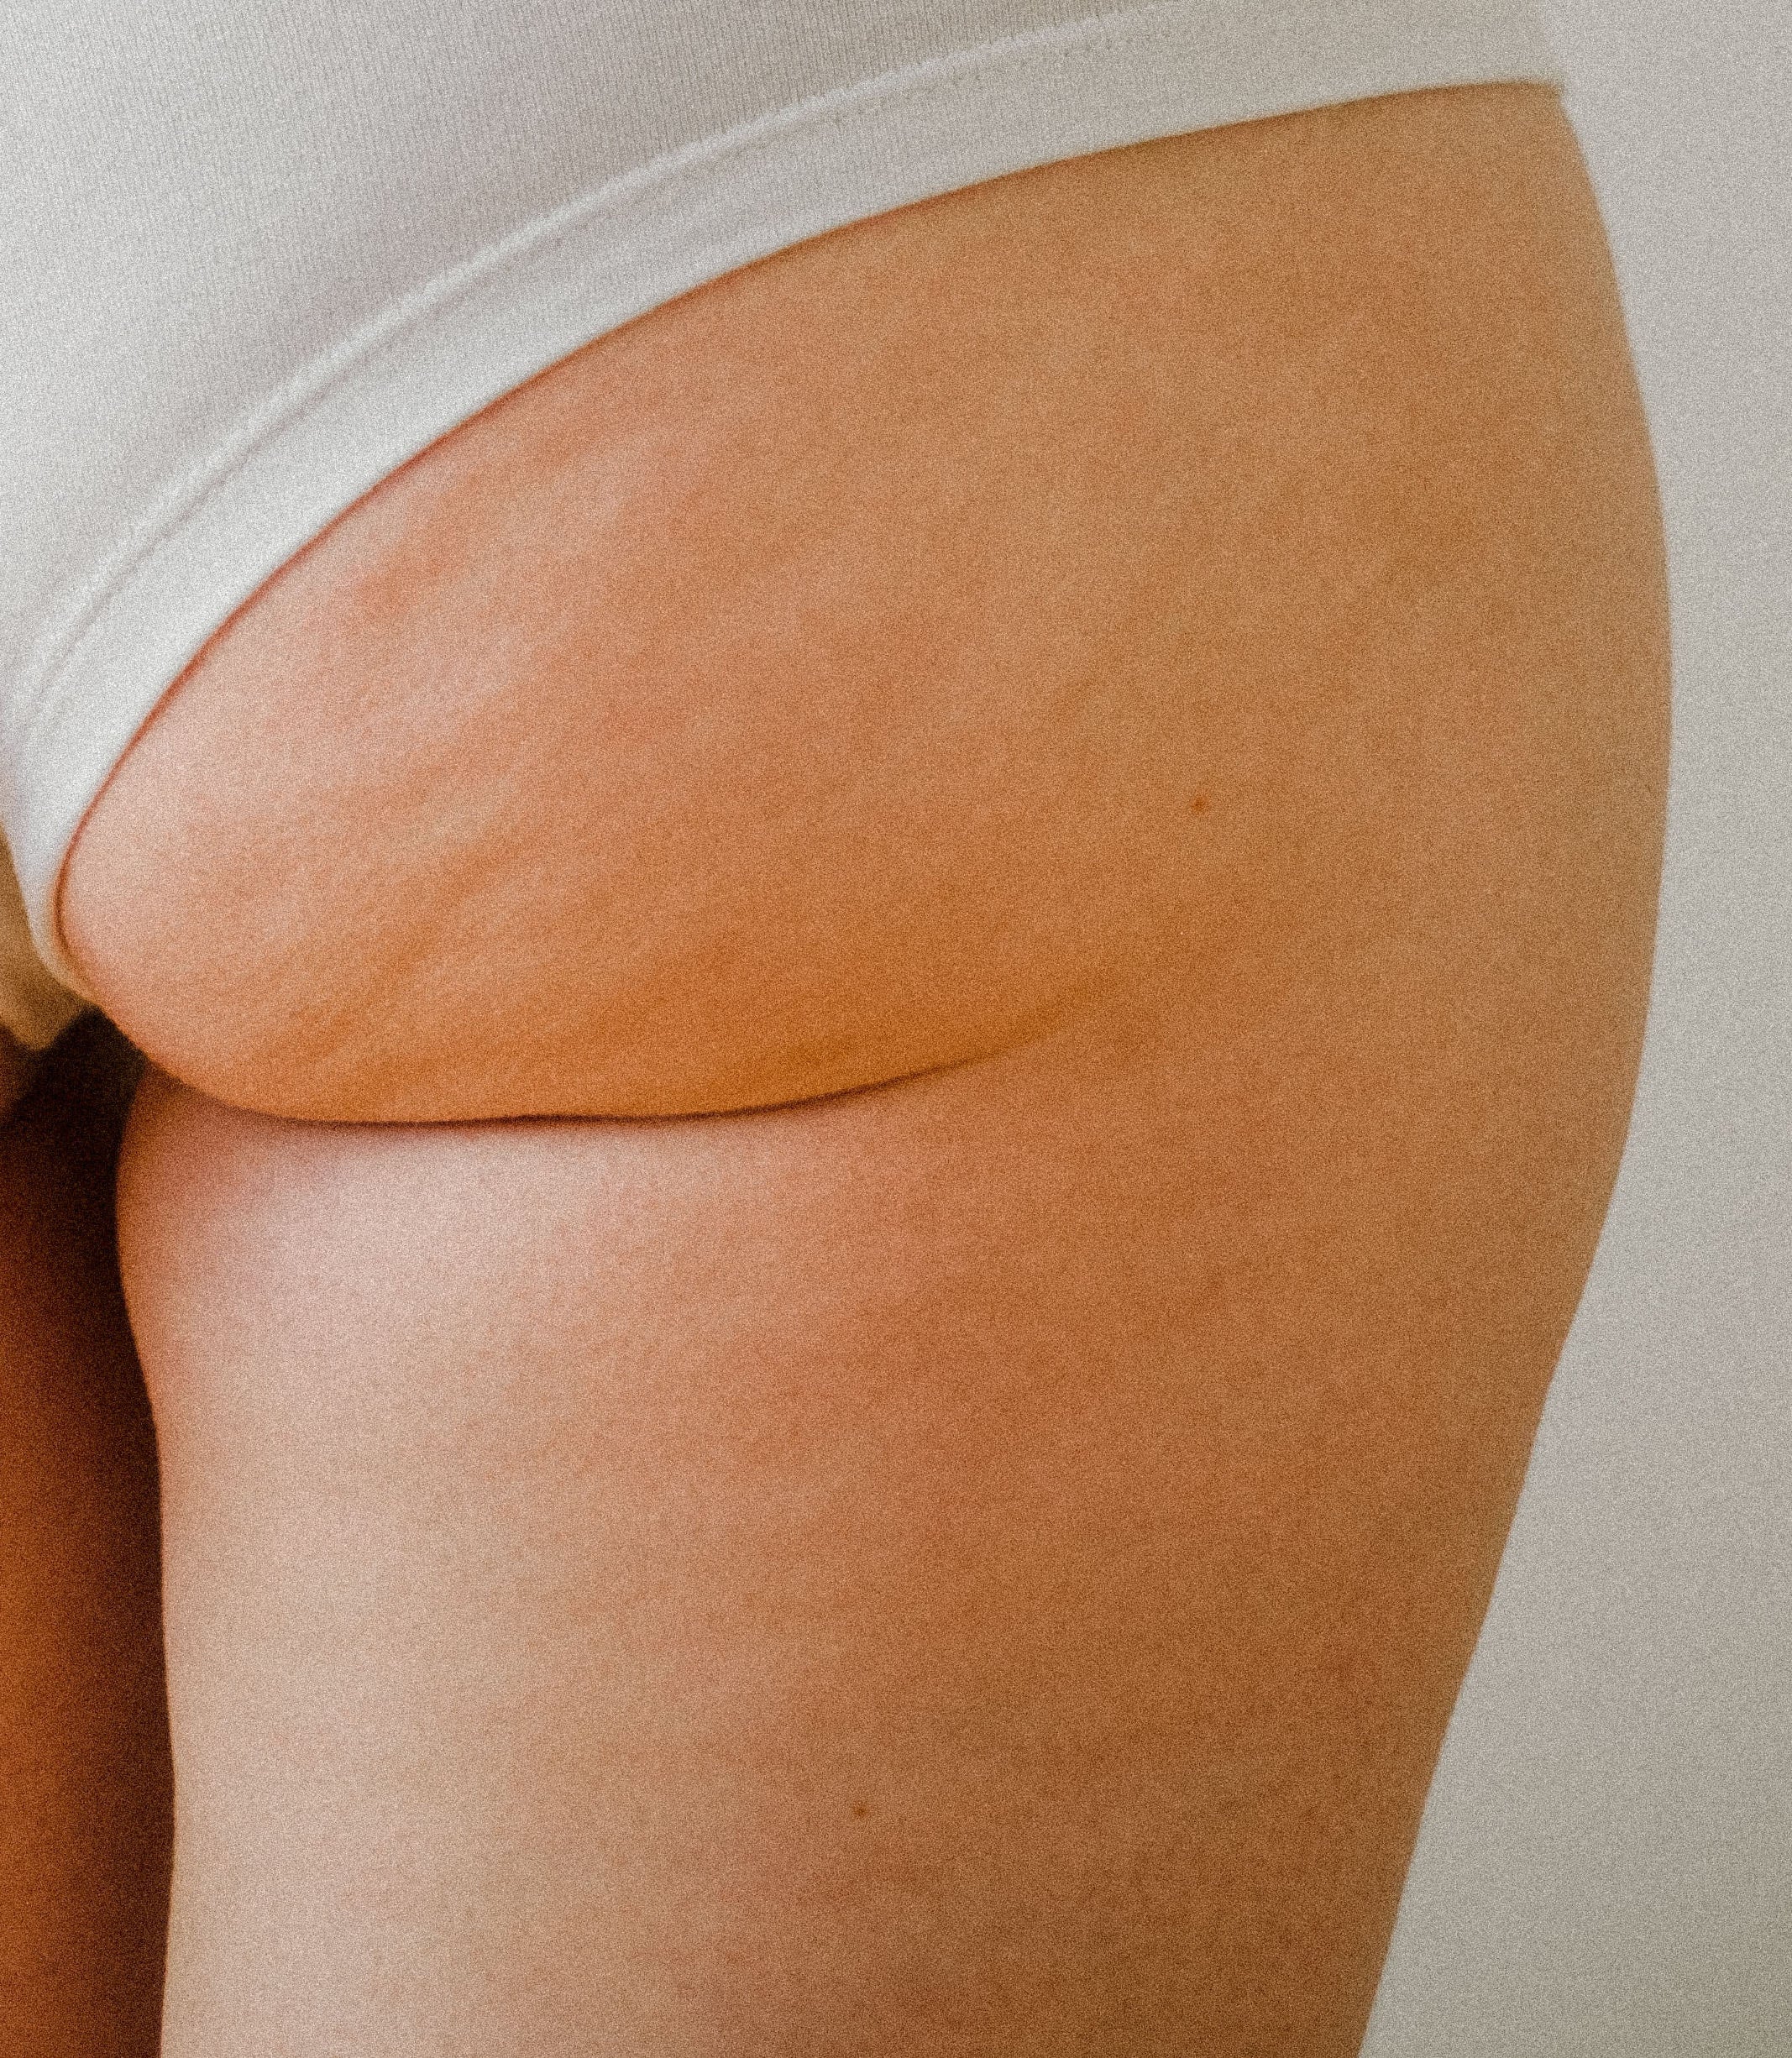 It's Time to Embrace Cellulite – Move With Us